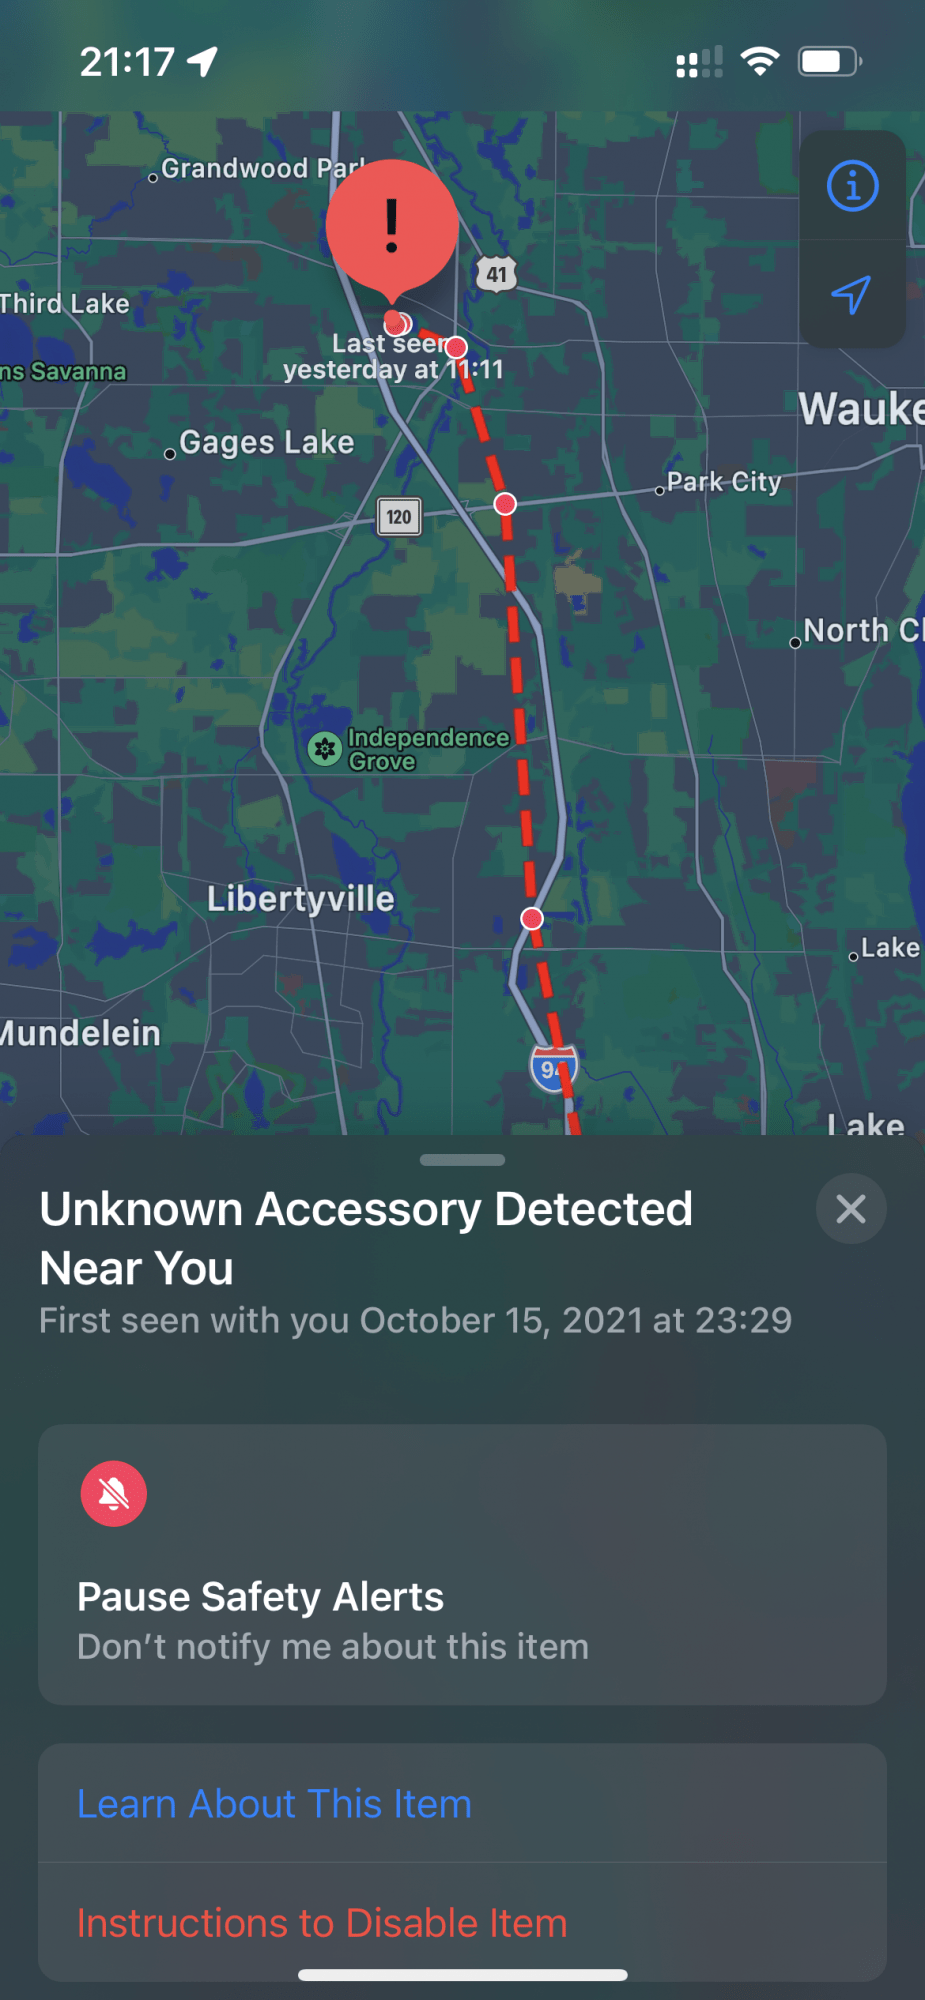 Unknown Accessory Detected Near You Explained